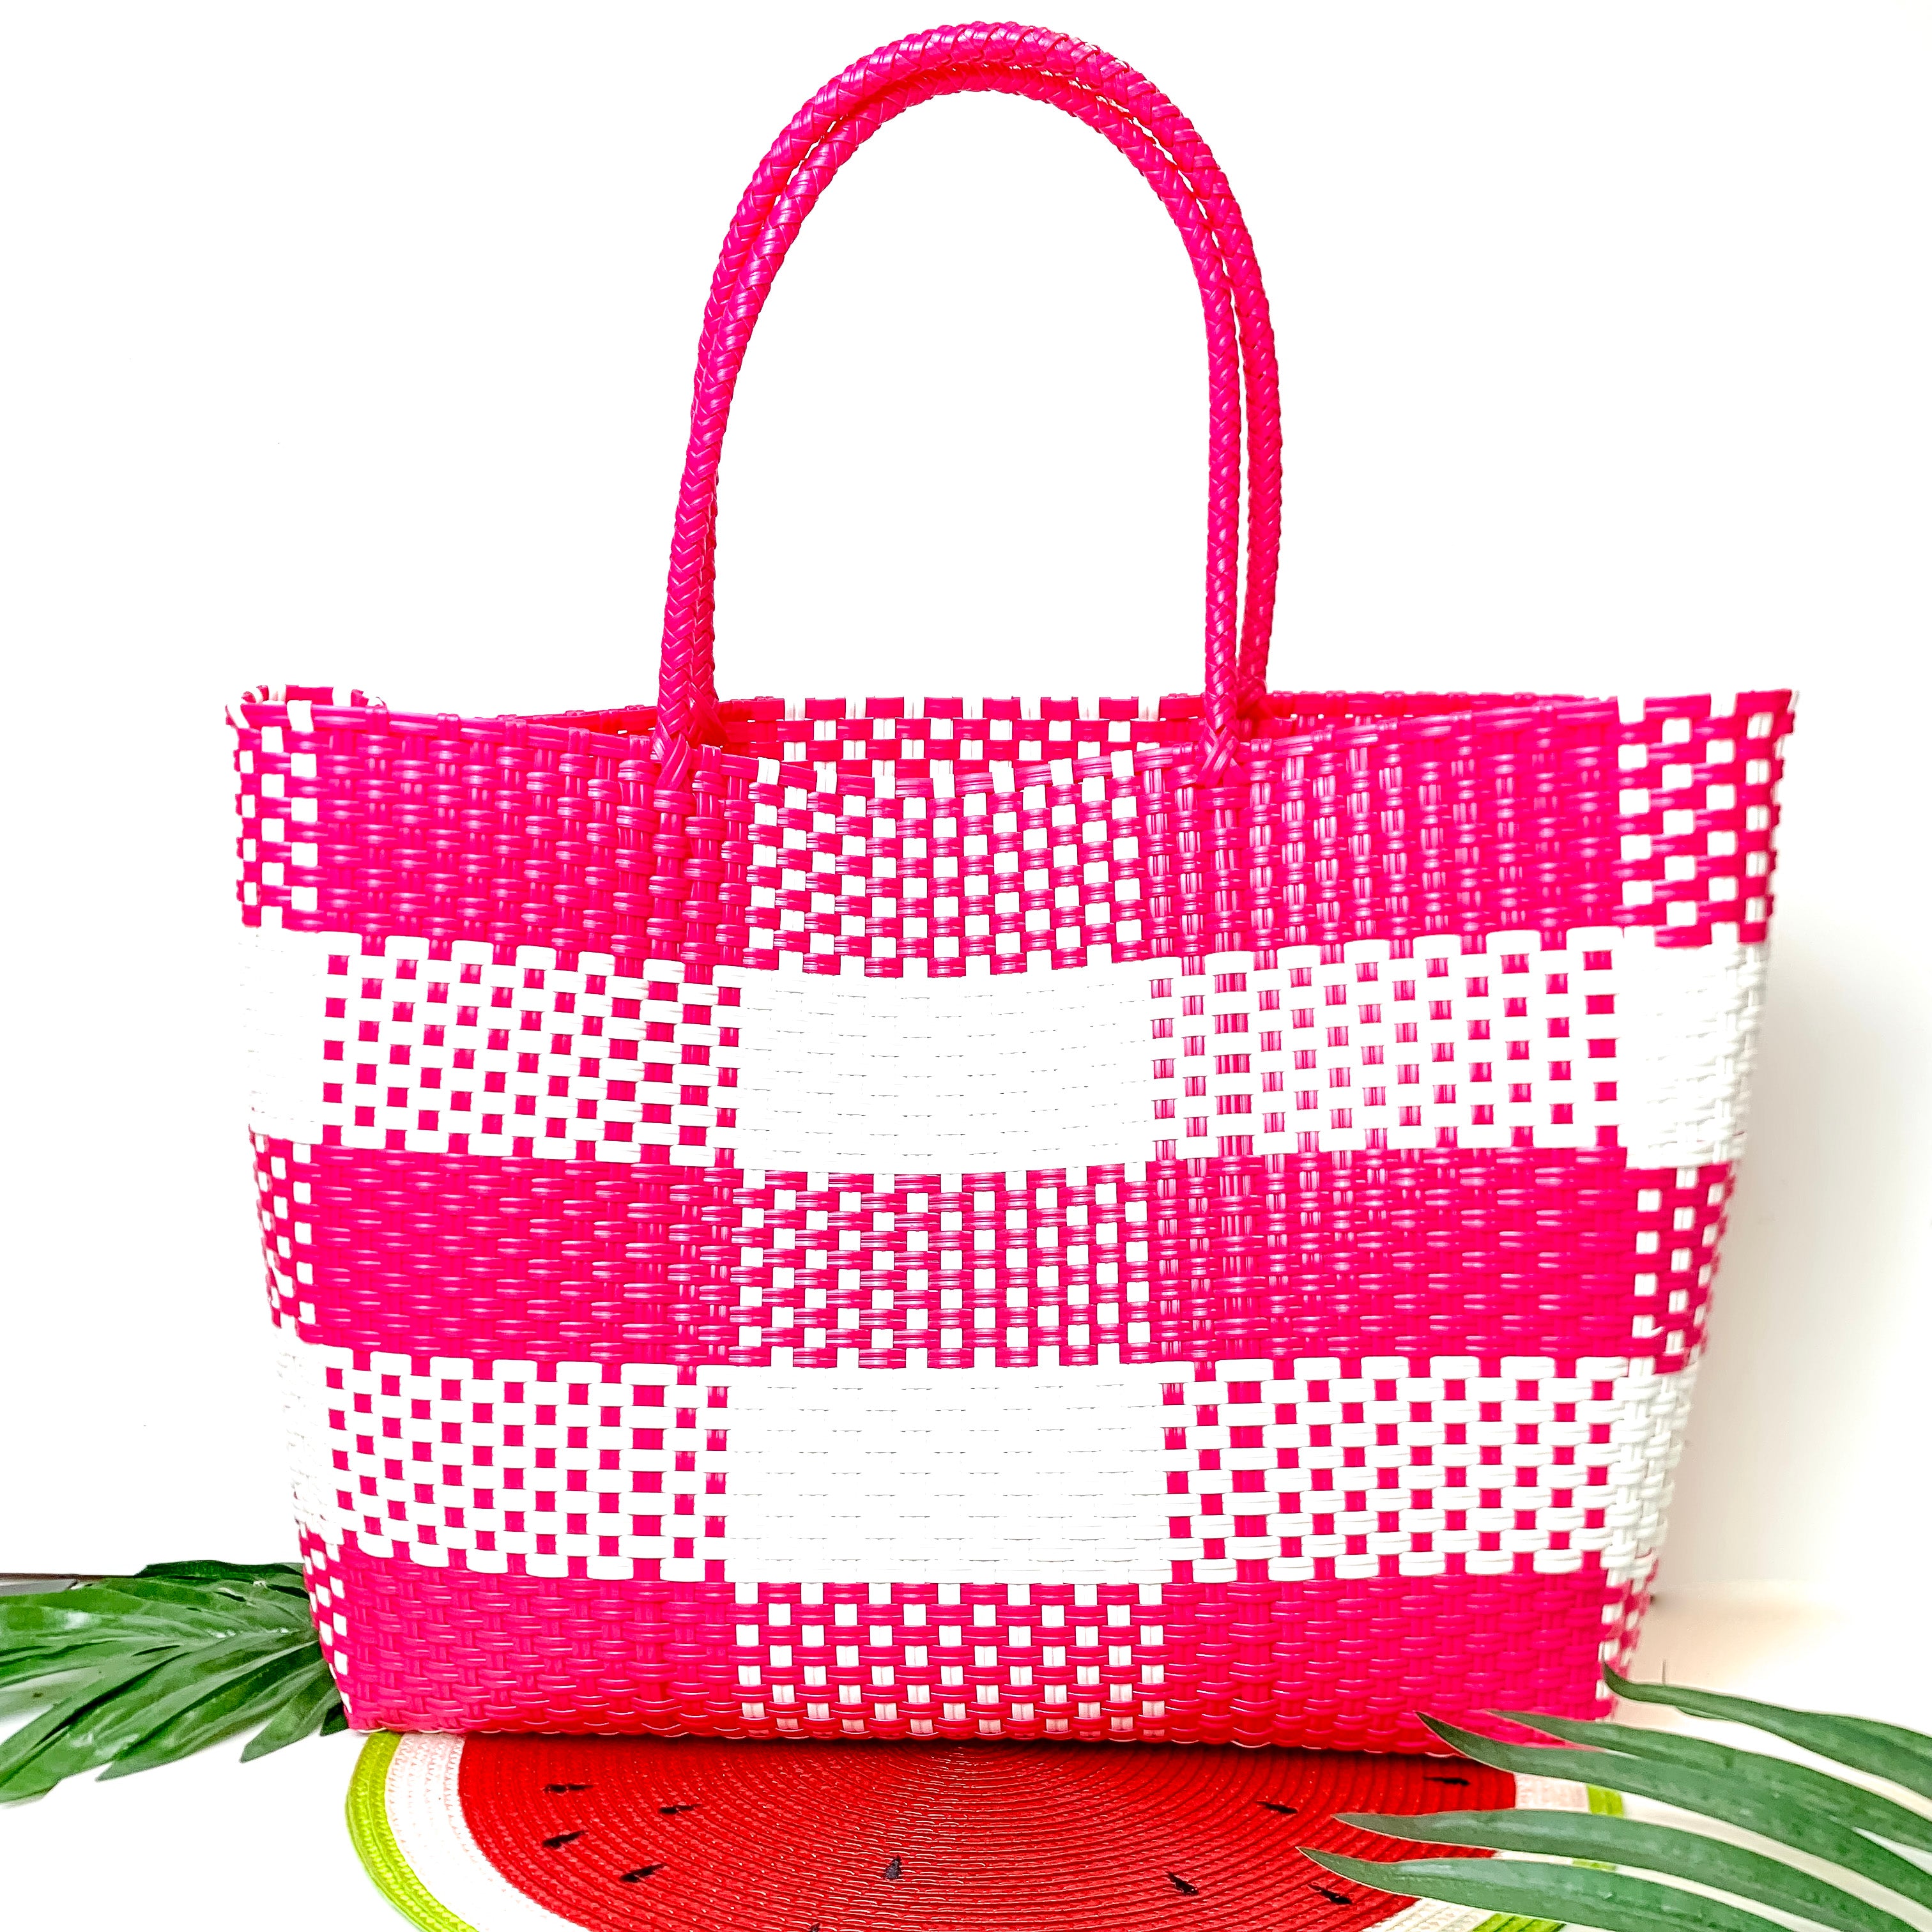 Garden Party Gingham Tote Bag in Neon Pink and White